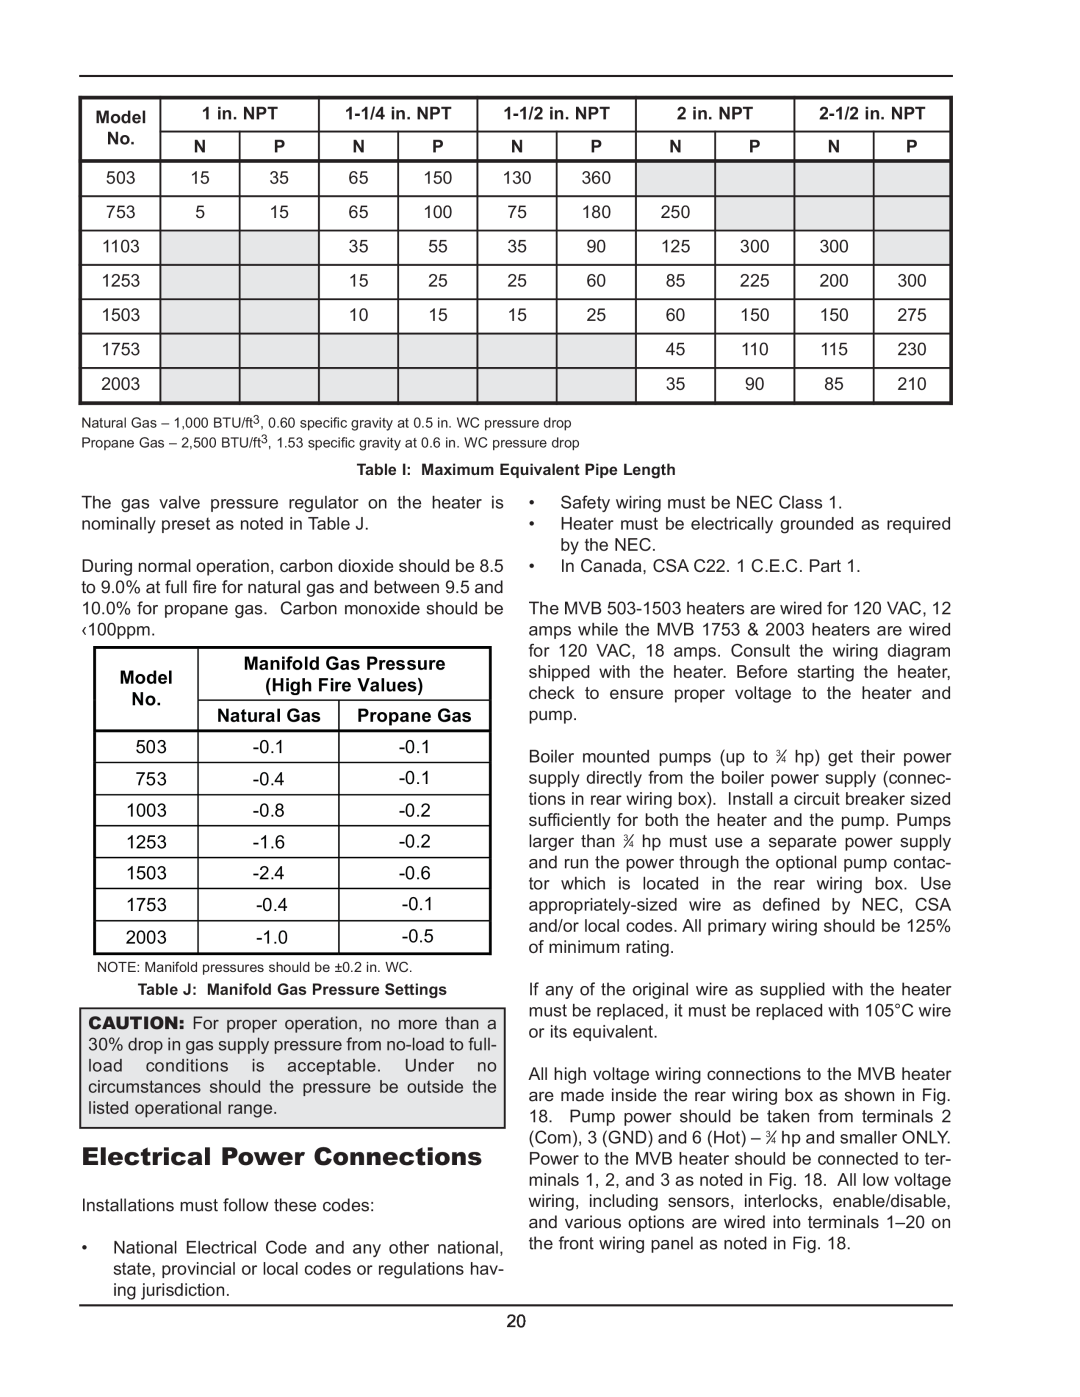 Raypak 503-2003 manual Electrical Power Connections, Natural Gas 